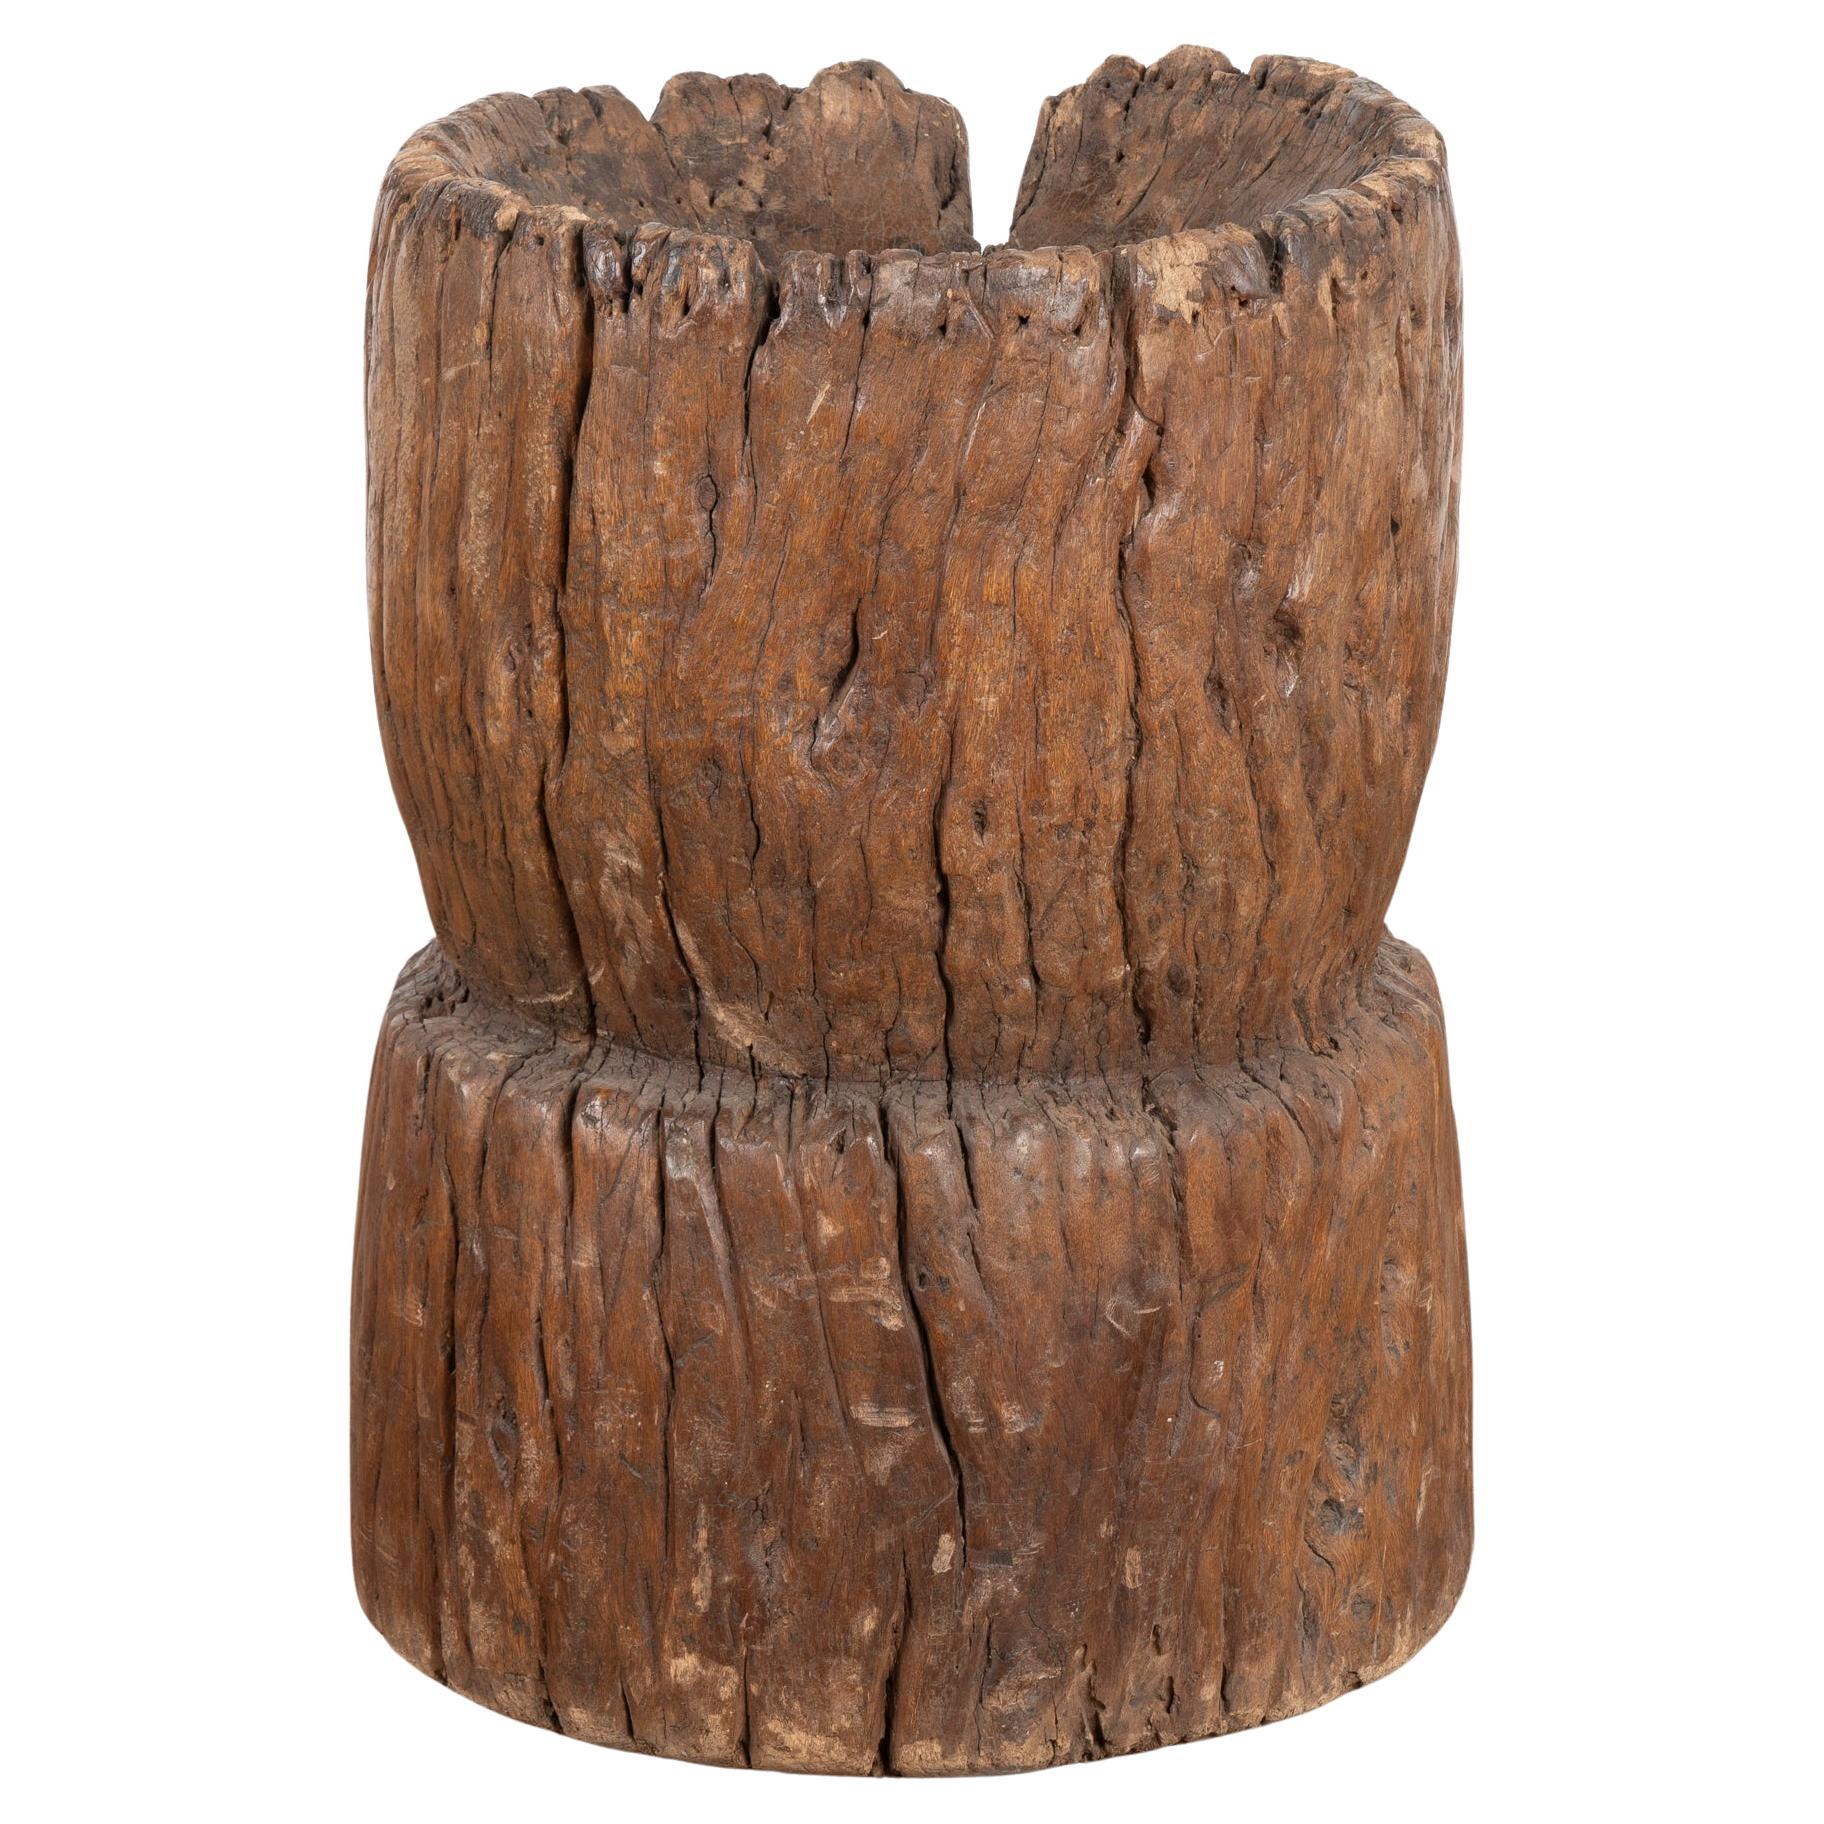 Wood Sculpture Container from Old Water Mill Gear, China 1820-40